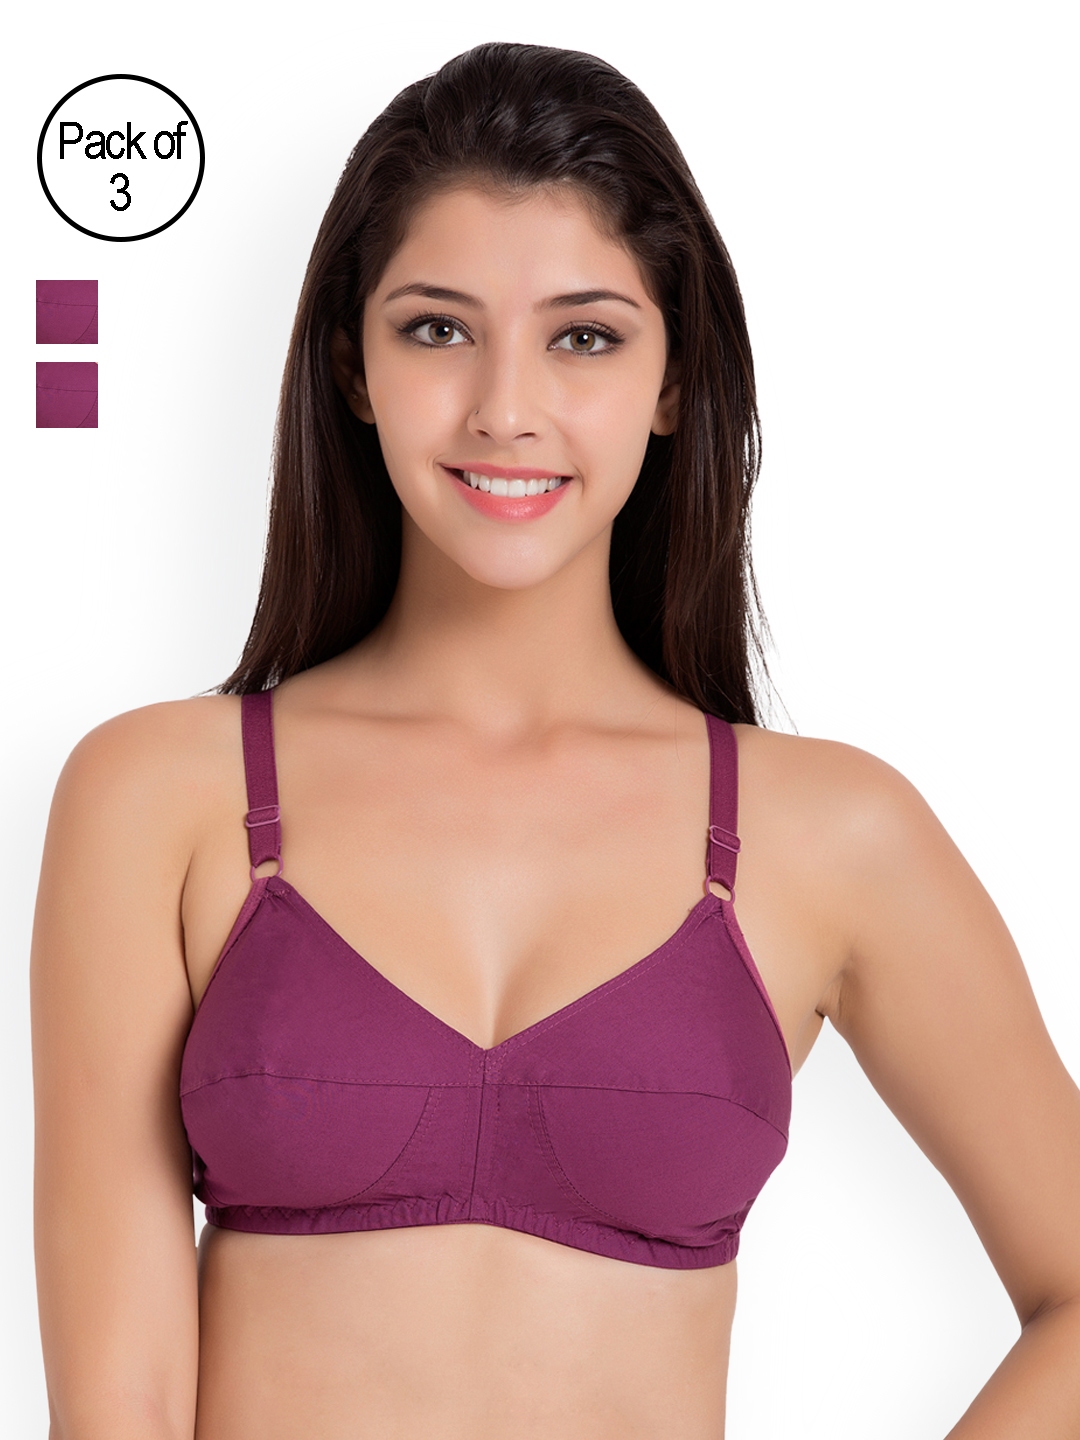 Souminie Pack of 3 Full-Coverage Comfort Fit Bras SLY931-3PC-MG